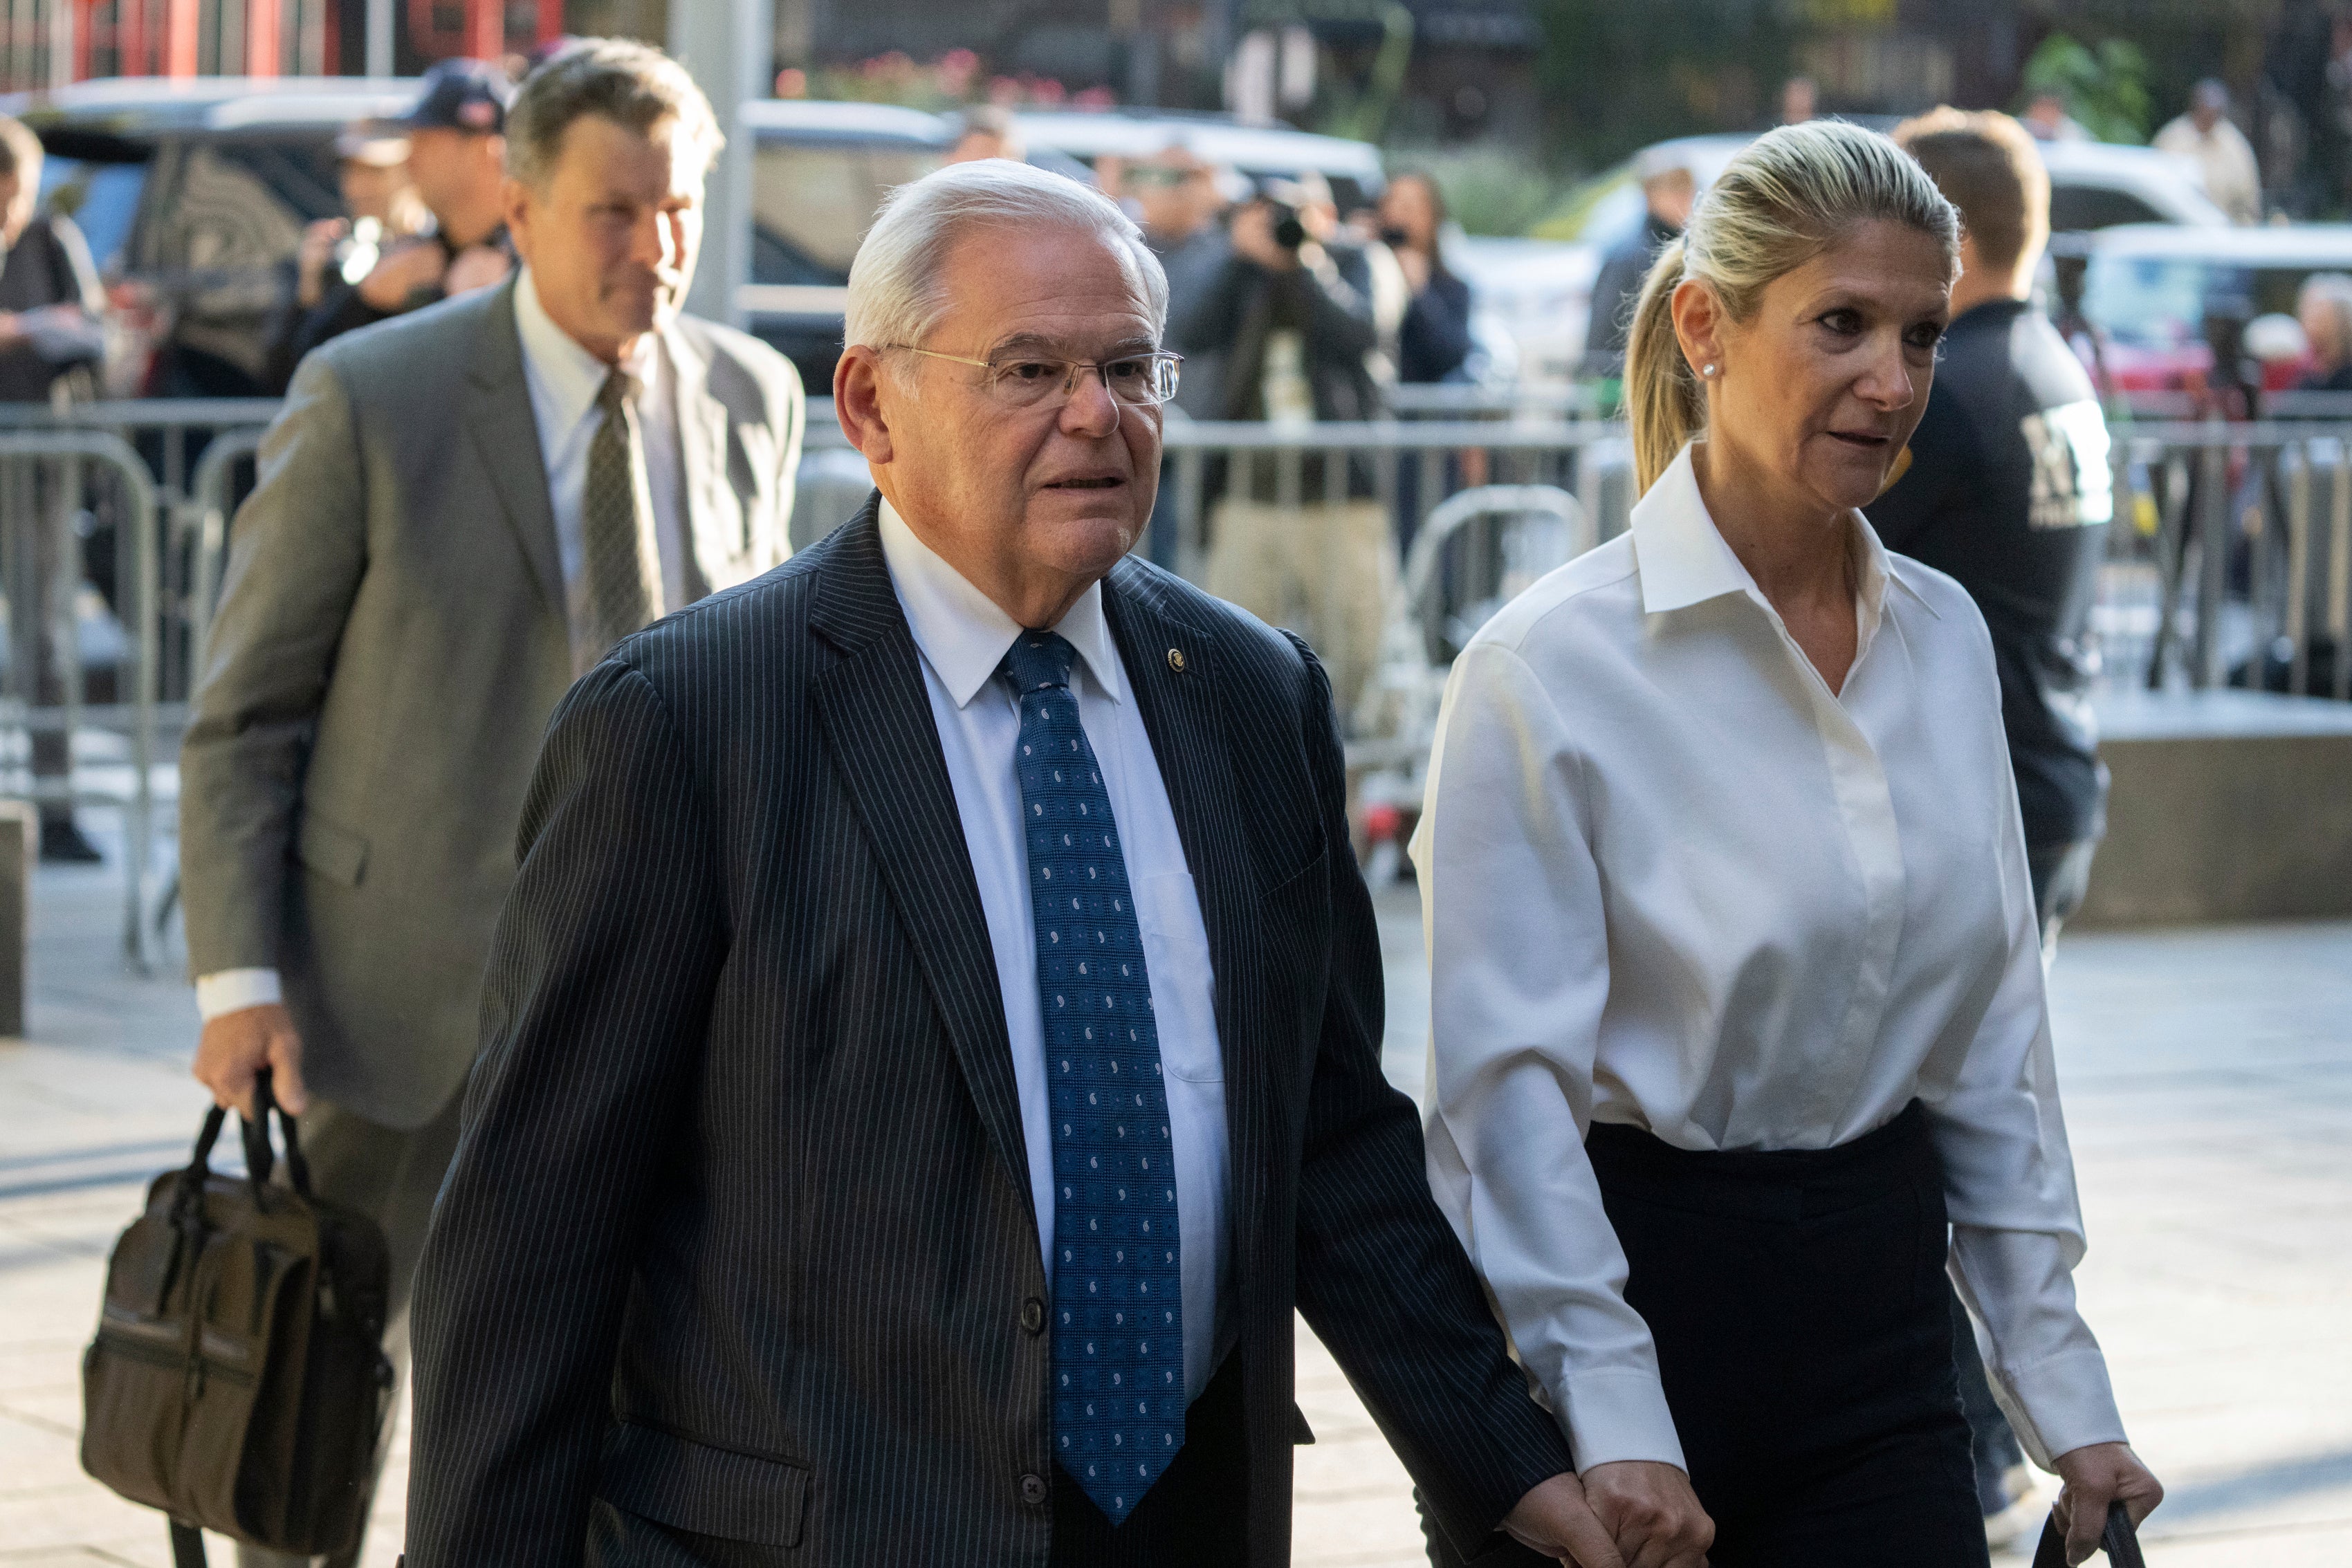 jury in bob menendez bribery trial will hear of cash and gold bars ‘stuffed in safes and jackets’, judge rules